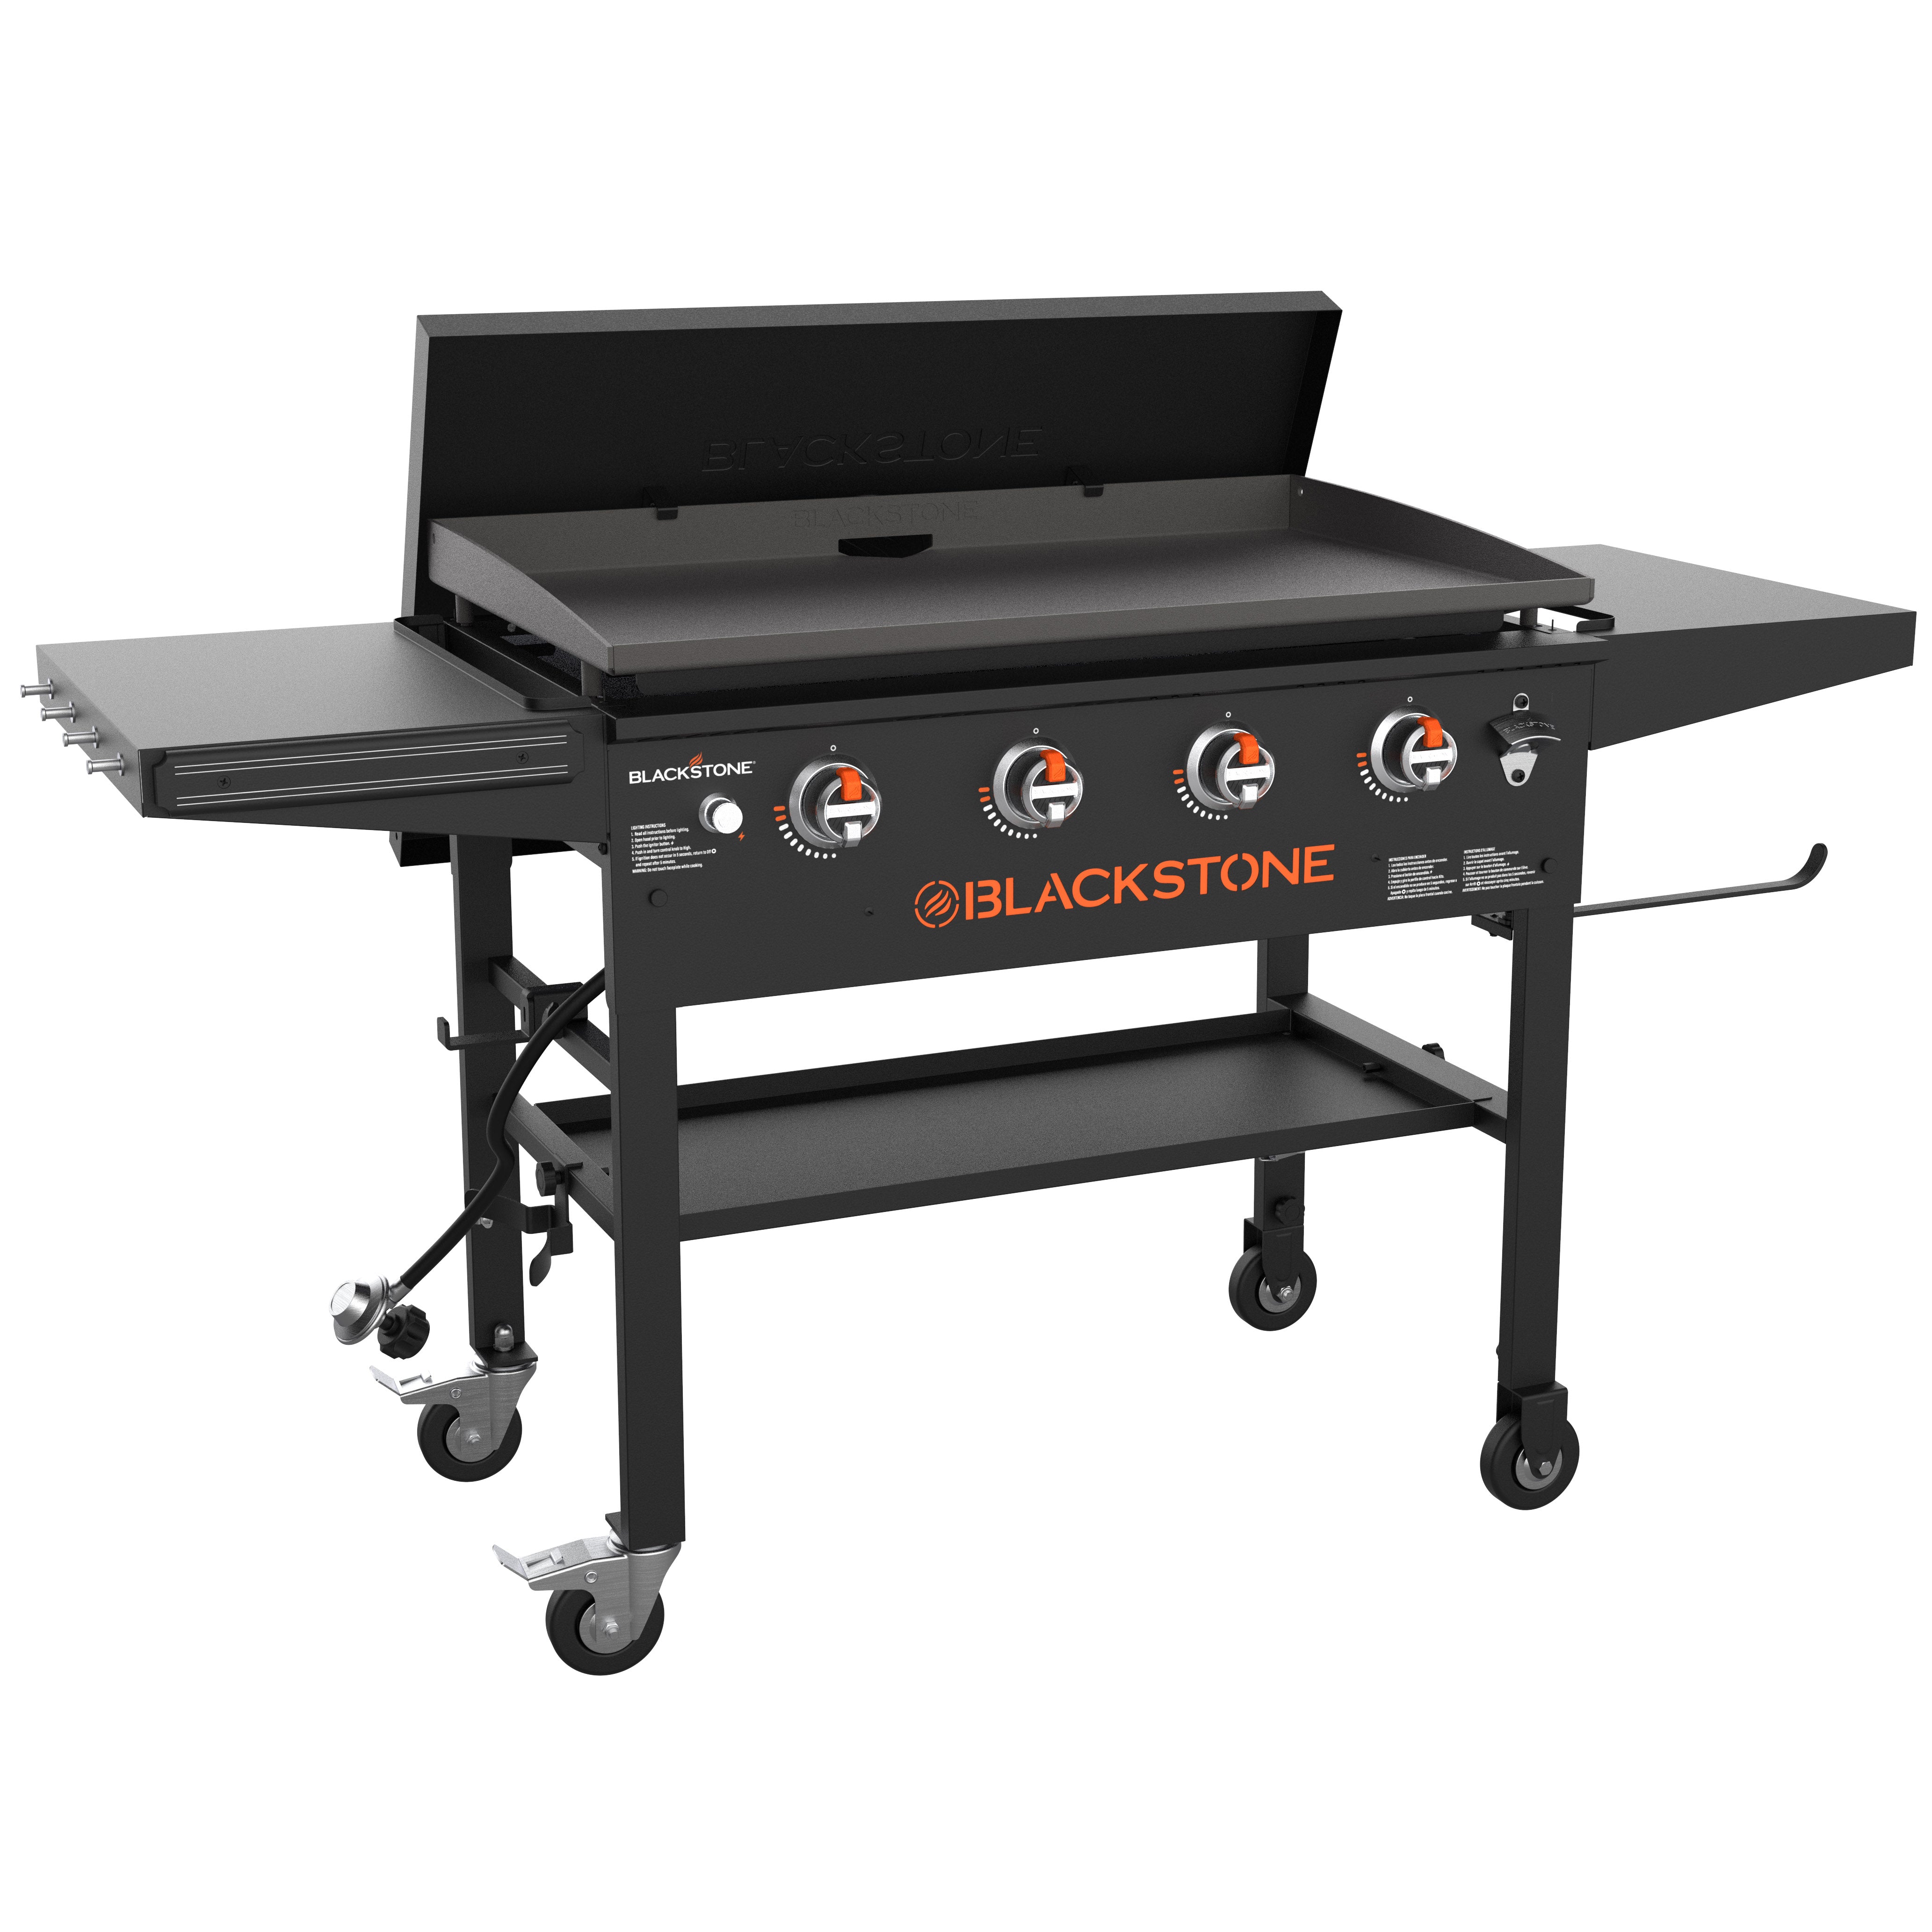 Blackstone 36 inch griddle with hardcover - 2149